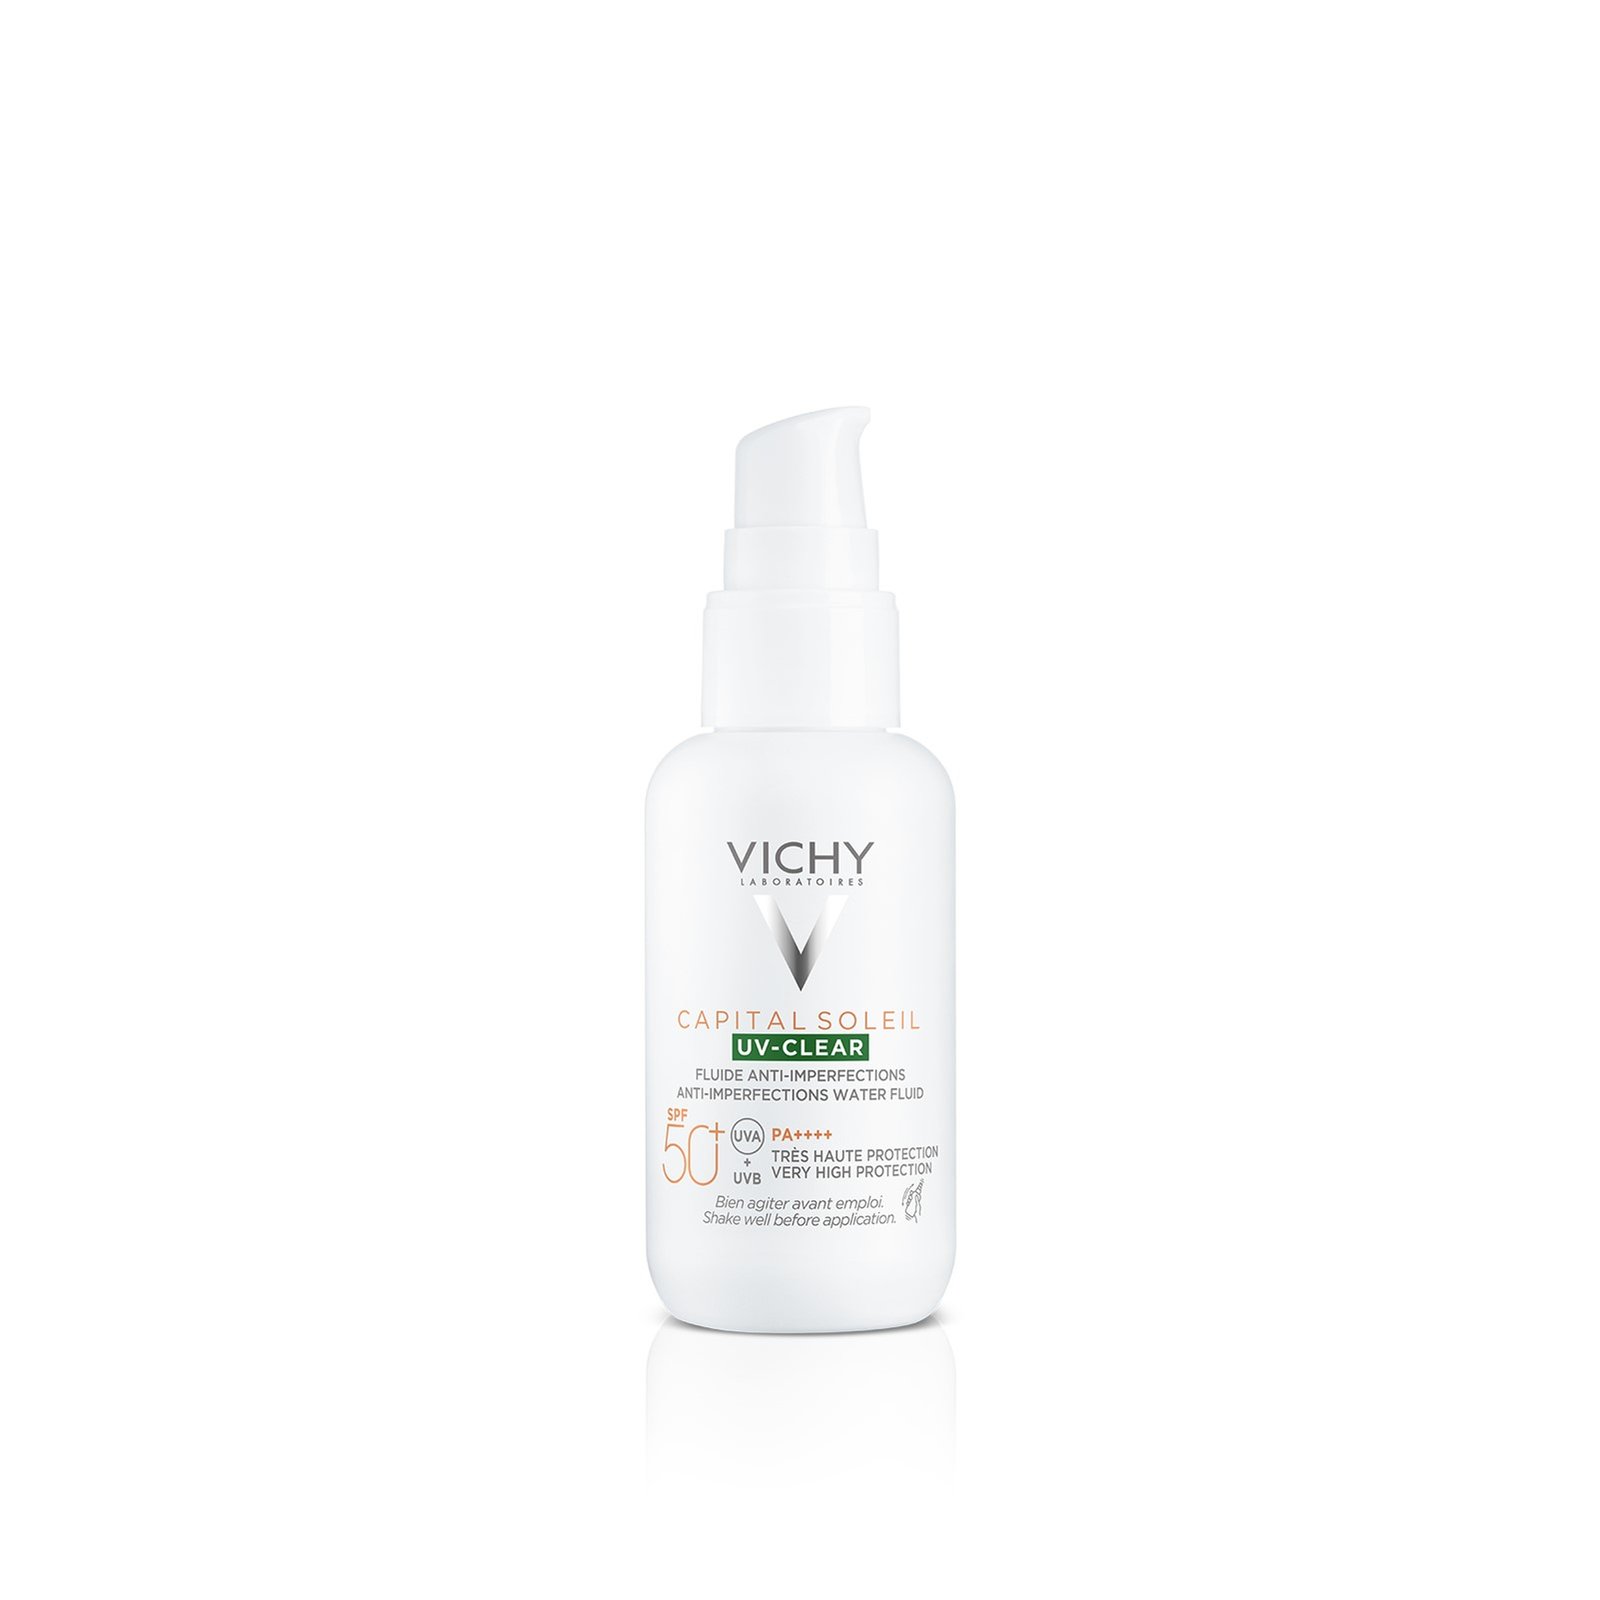 Vichy Capital Soleil UV-Clear Anti-Imperfections Water Fluid SPF50+ 40ml